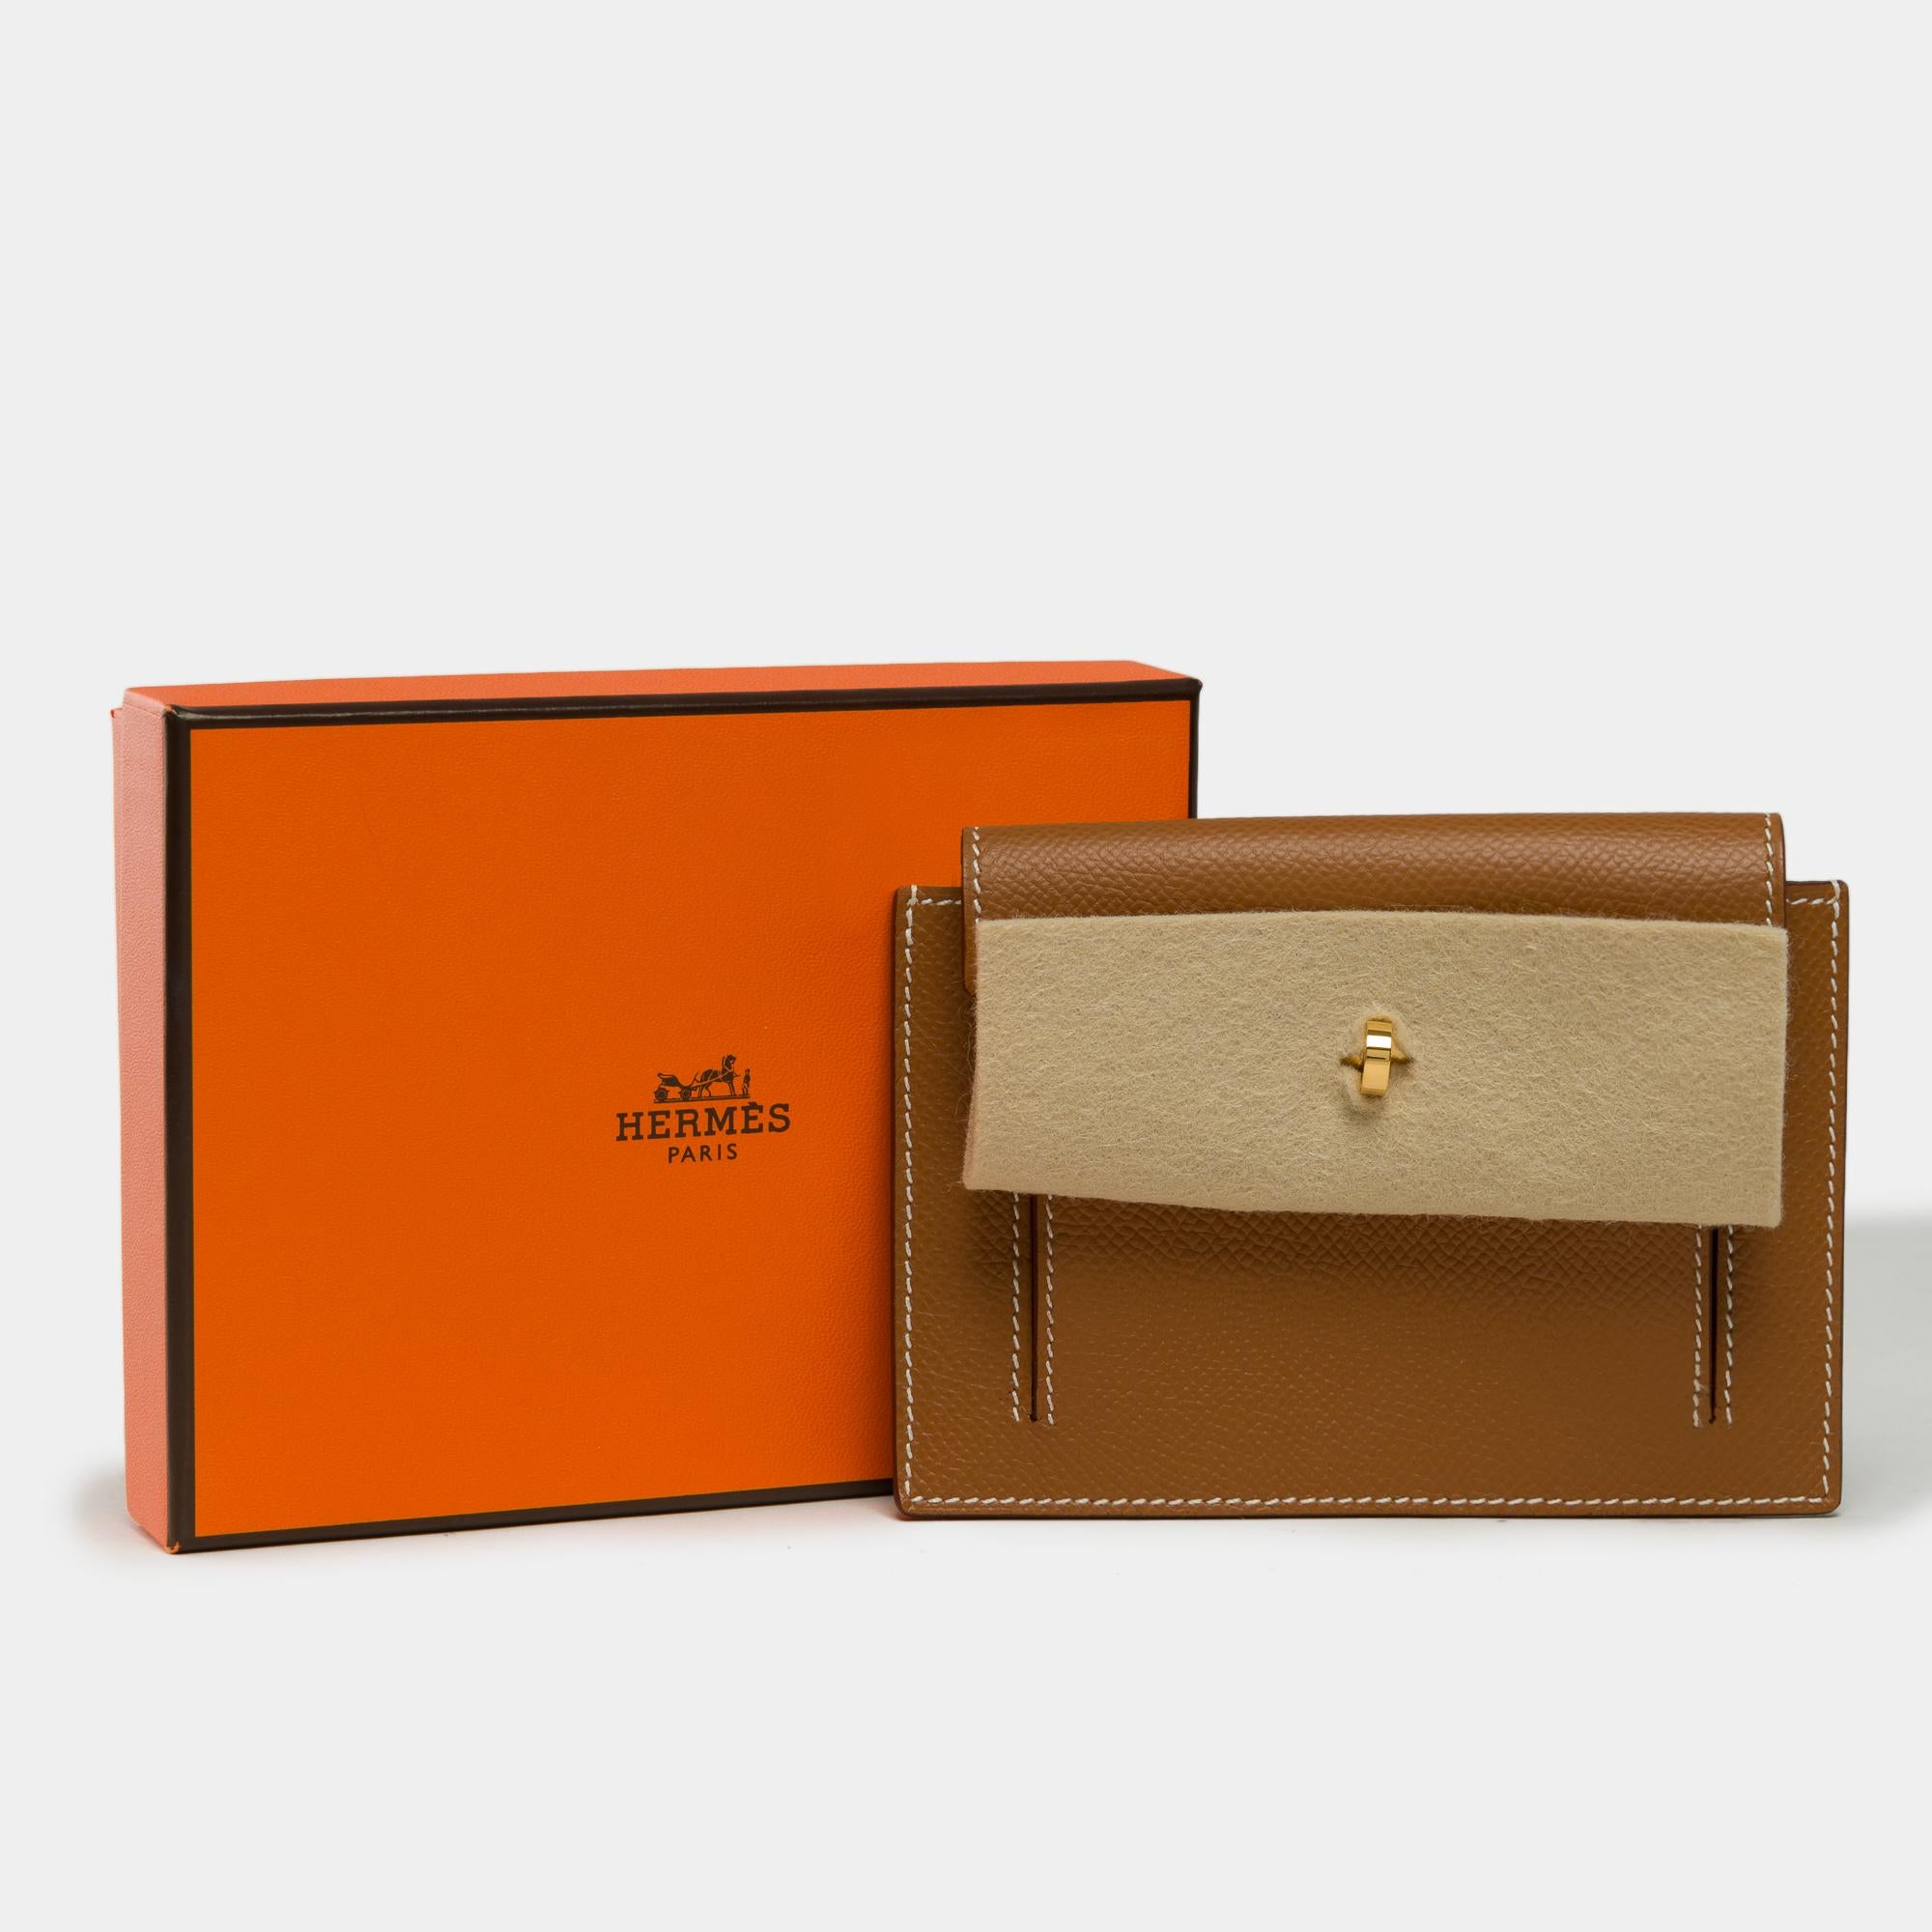 Gorgeous​ ​Hermès​ ​Kelly​ ​Pocket​ ​Compact​ ​Wallet​ ​in​ ​Epsom​ ​Gold​ ​leather,​ ​gold​ ​plated​ ​metal​ ​trim​ ​​ ​

Flap​ ​closure
Inner​ ​lining​ ​in​ ​epsom​ ​gold​ ​leather,​ ​a​ ​zippered​ ​pocket​ ​on​ ​the​ ​back​ ​
Signature:​